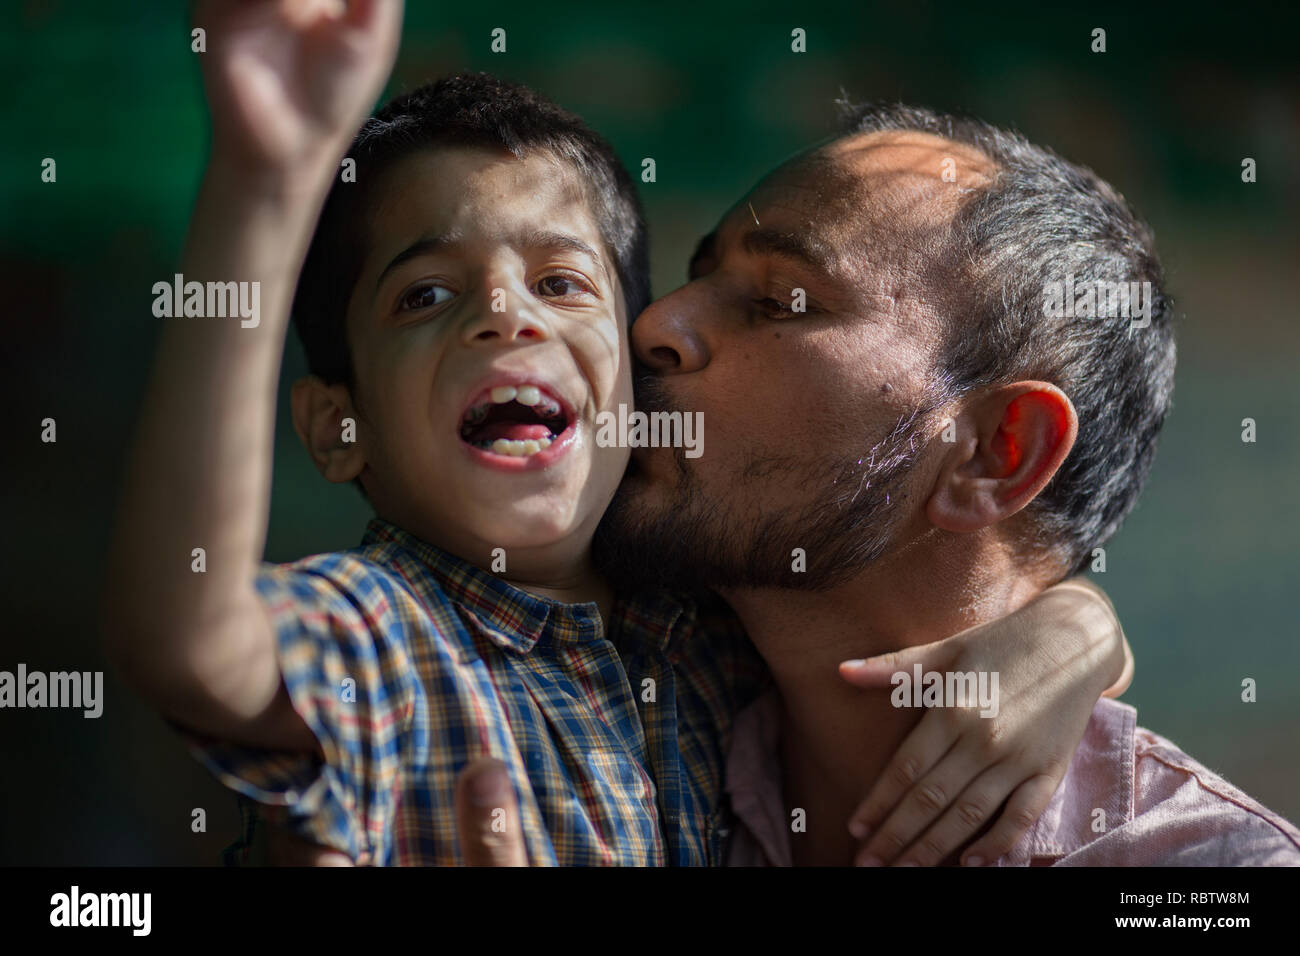 A father seen embracing his son at Chingari Rehabilitation Center. Chingari cares for victims of the Bhopal Gas Disaster. The Bhopal Gas Disaster was a gas leak incident on the night of 2-3 December 1984 at the Union Carbide plant in Bhopal. Over 500,000 people were exposed to the toxic methyl isocyanate (MIC) gas as they slept. The final death toll is estimated to be between 15,000 and 20,000. Stock Photo